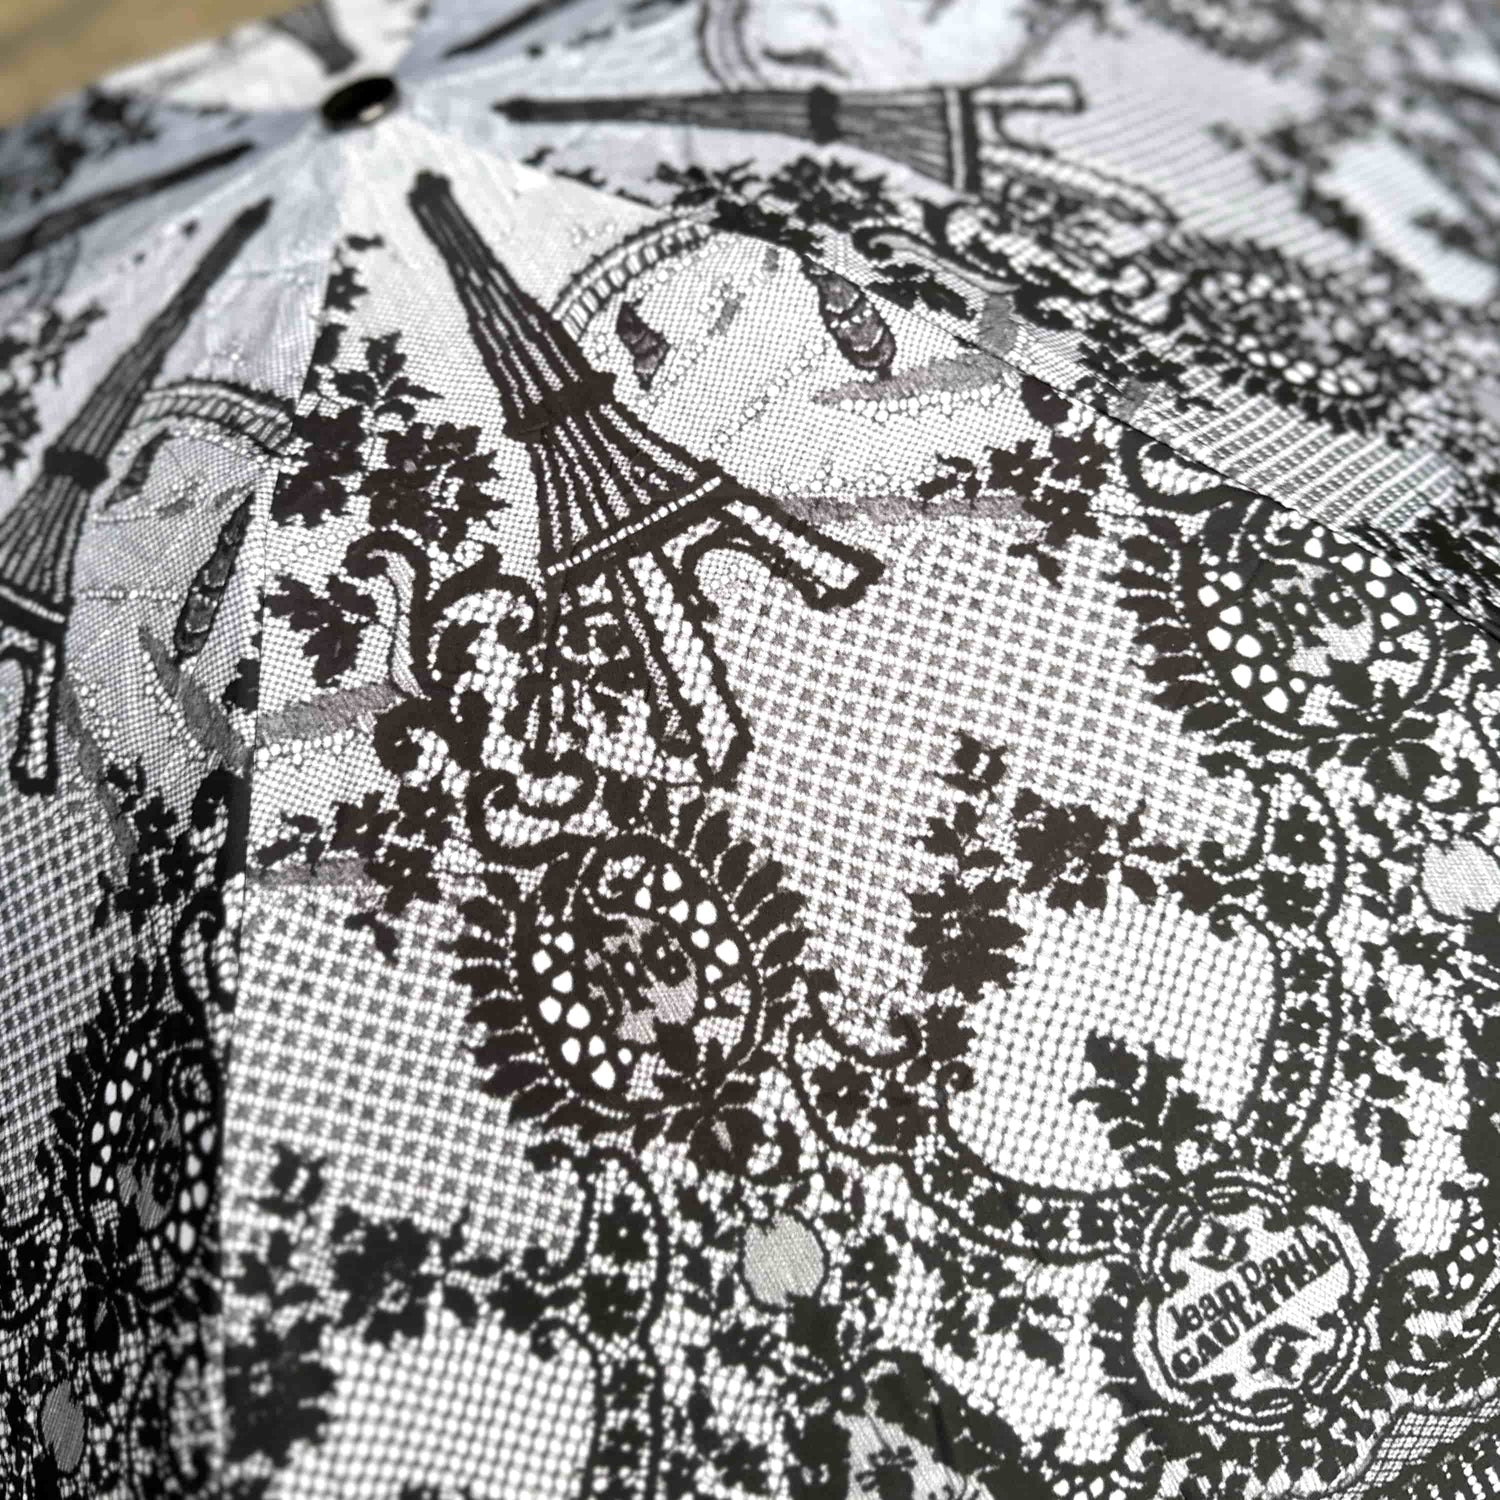 Jean Paul Gaultier umbrella made in France with Eiffel towers